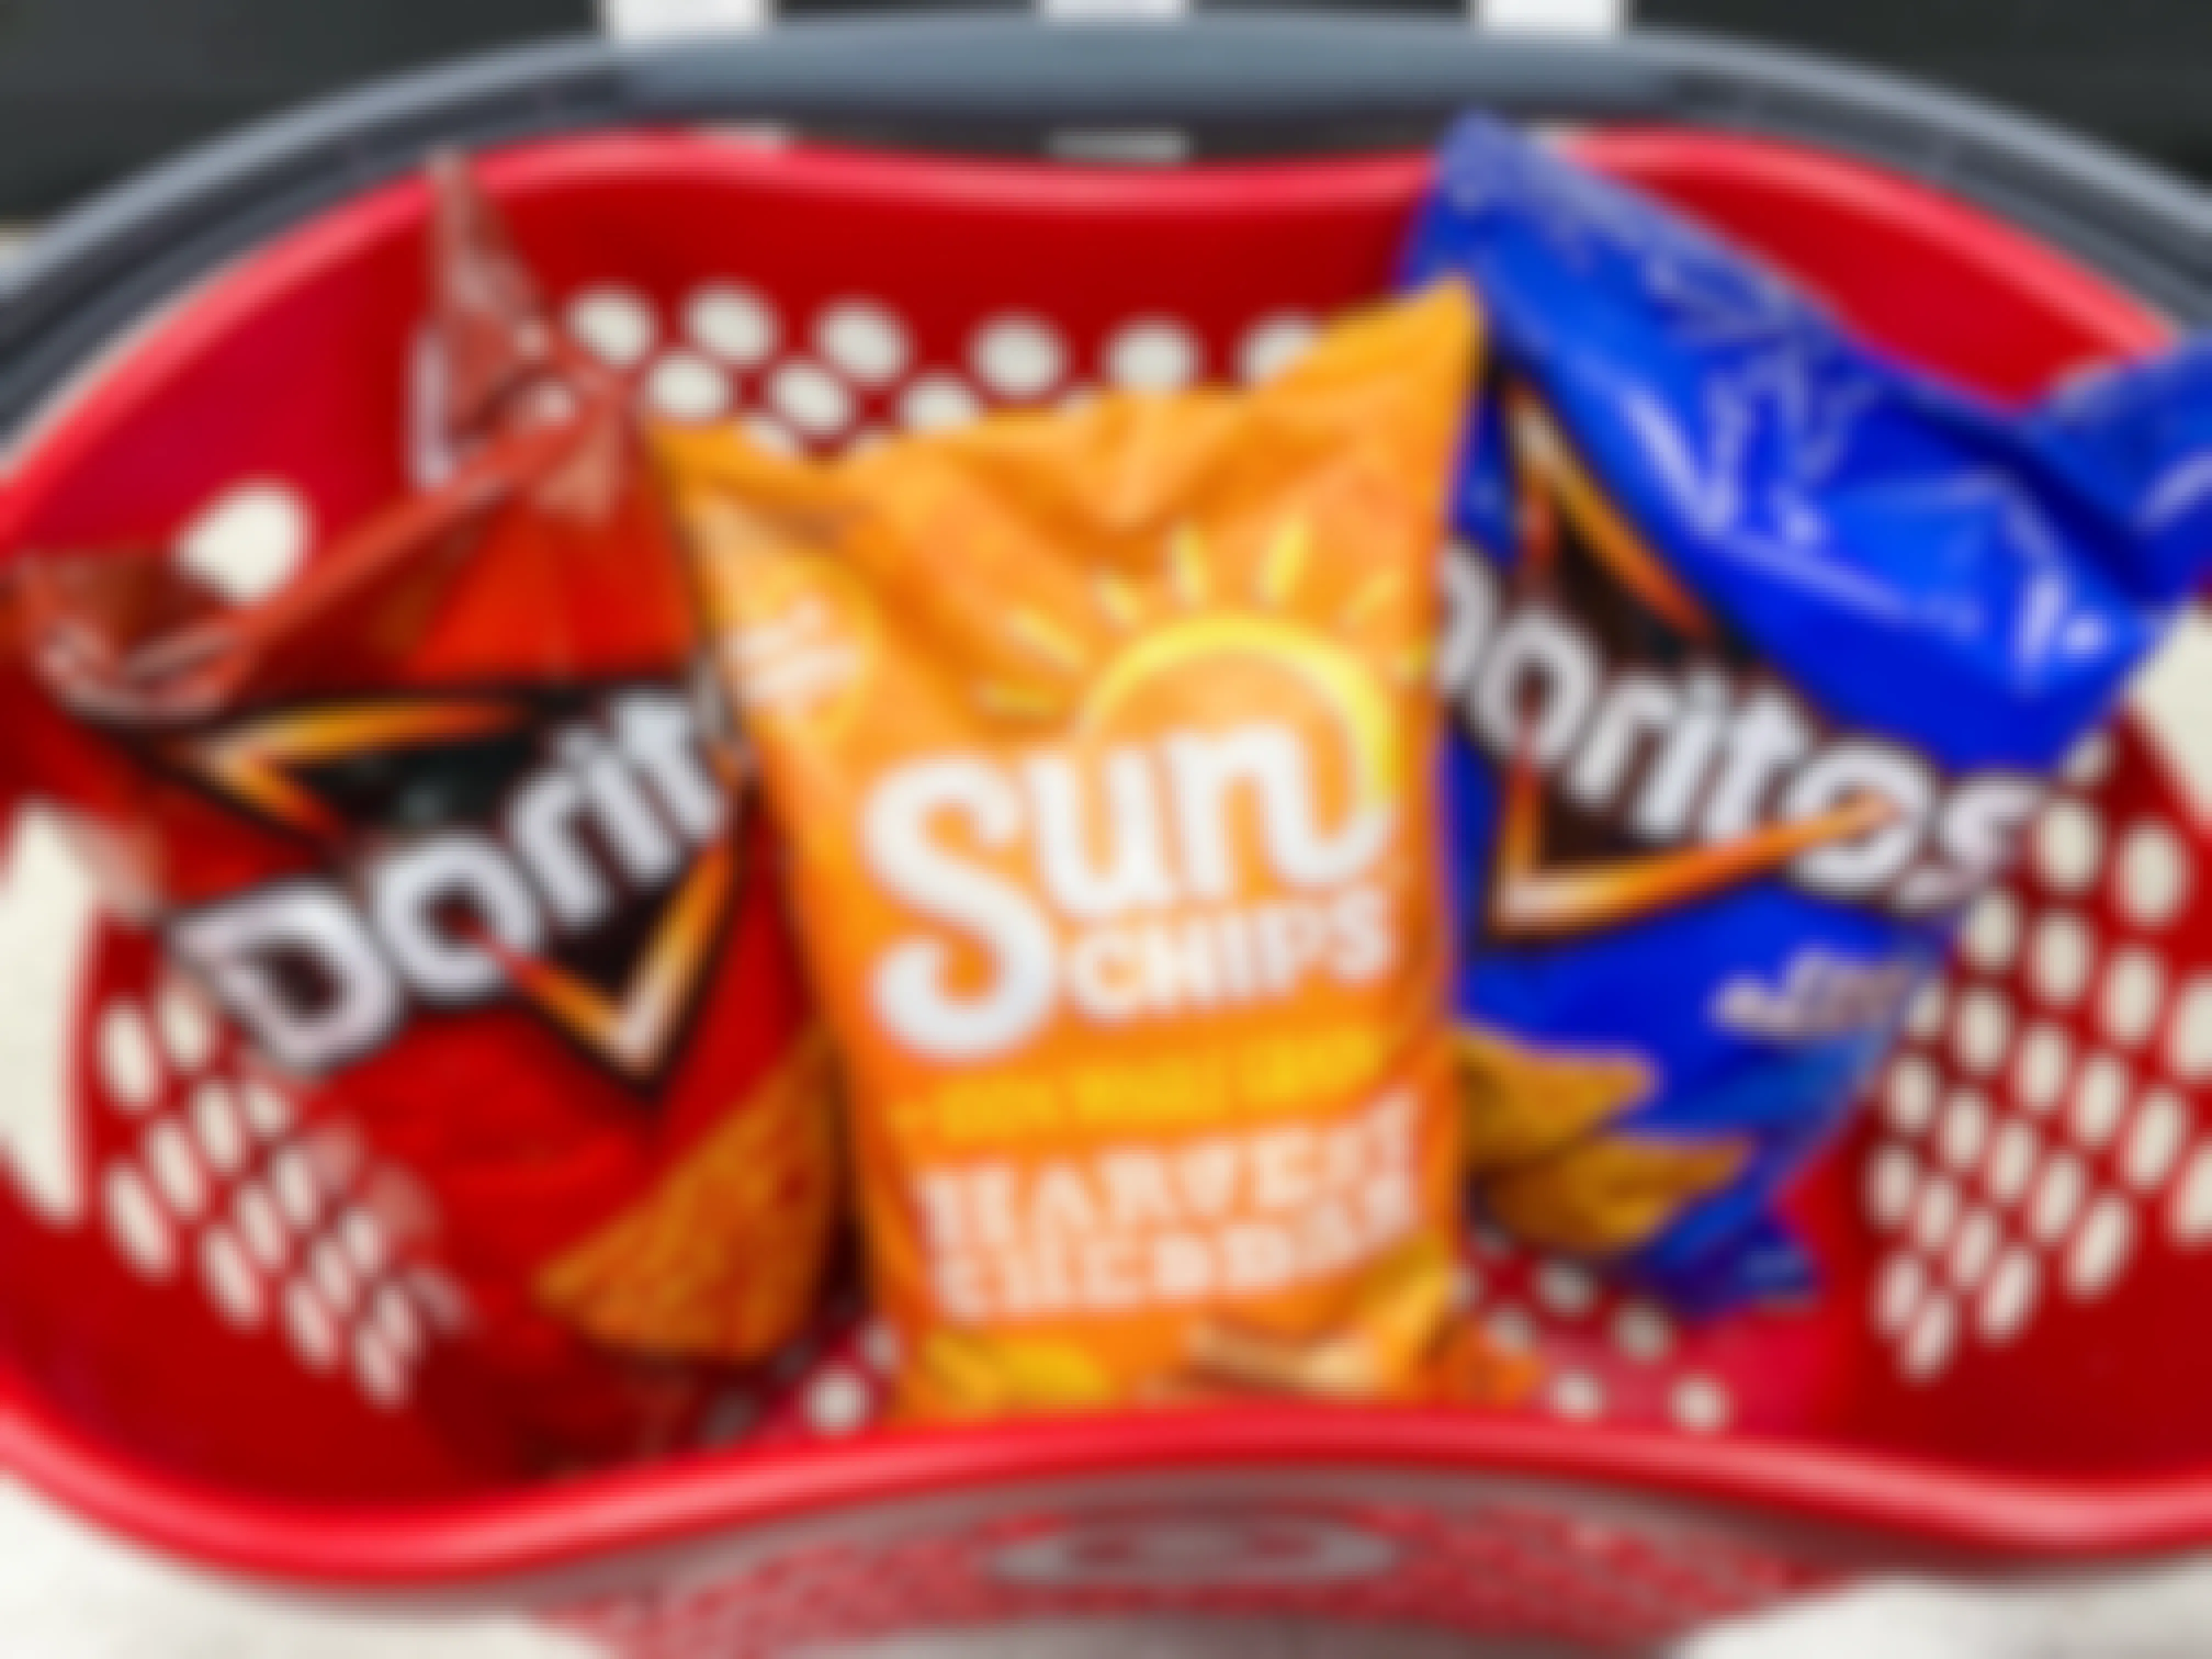 Doritos and Sun Chips in a Target basket